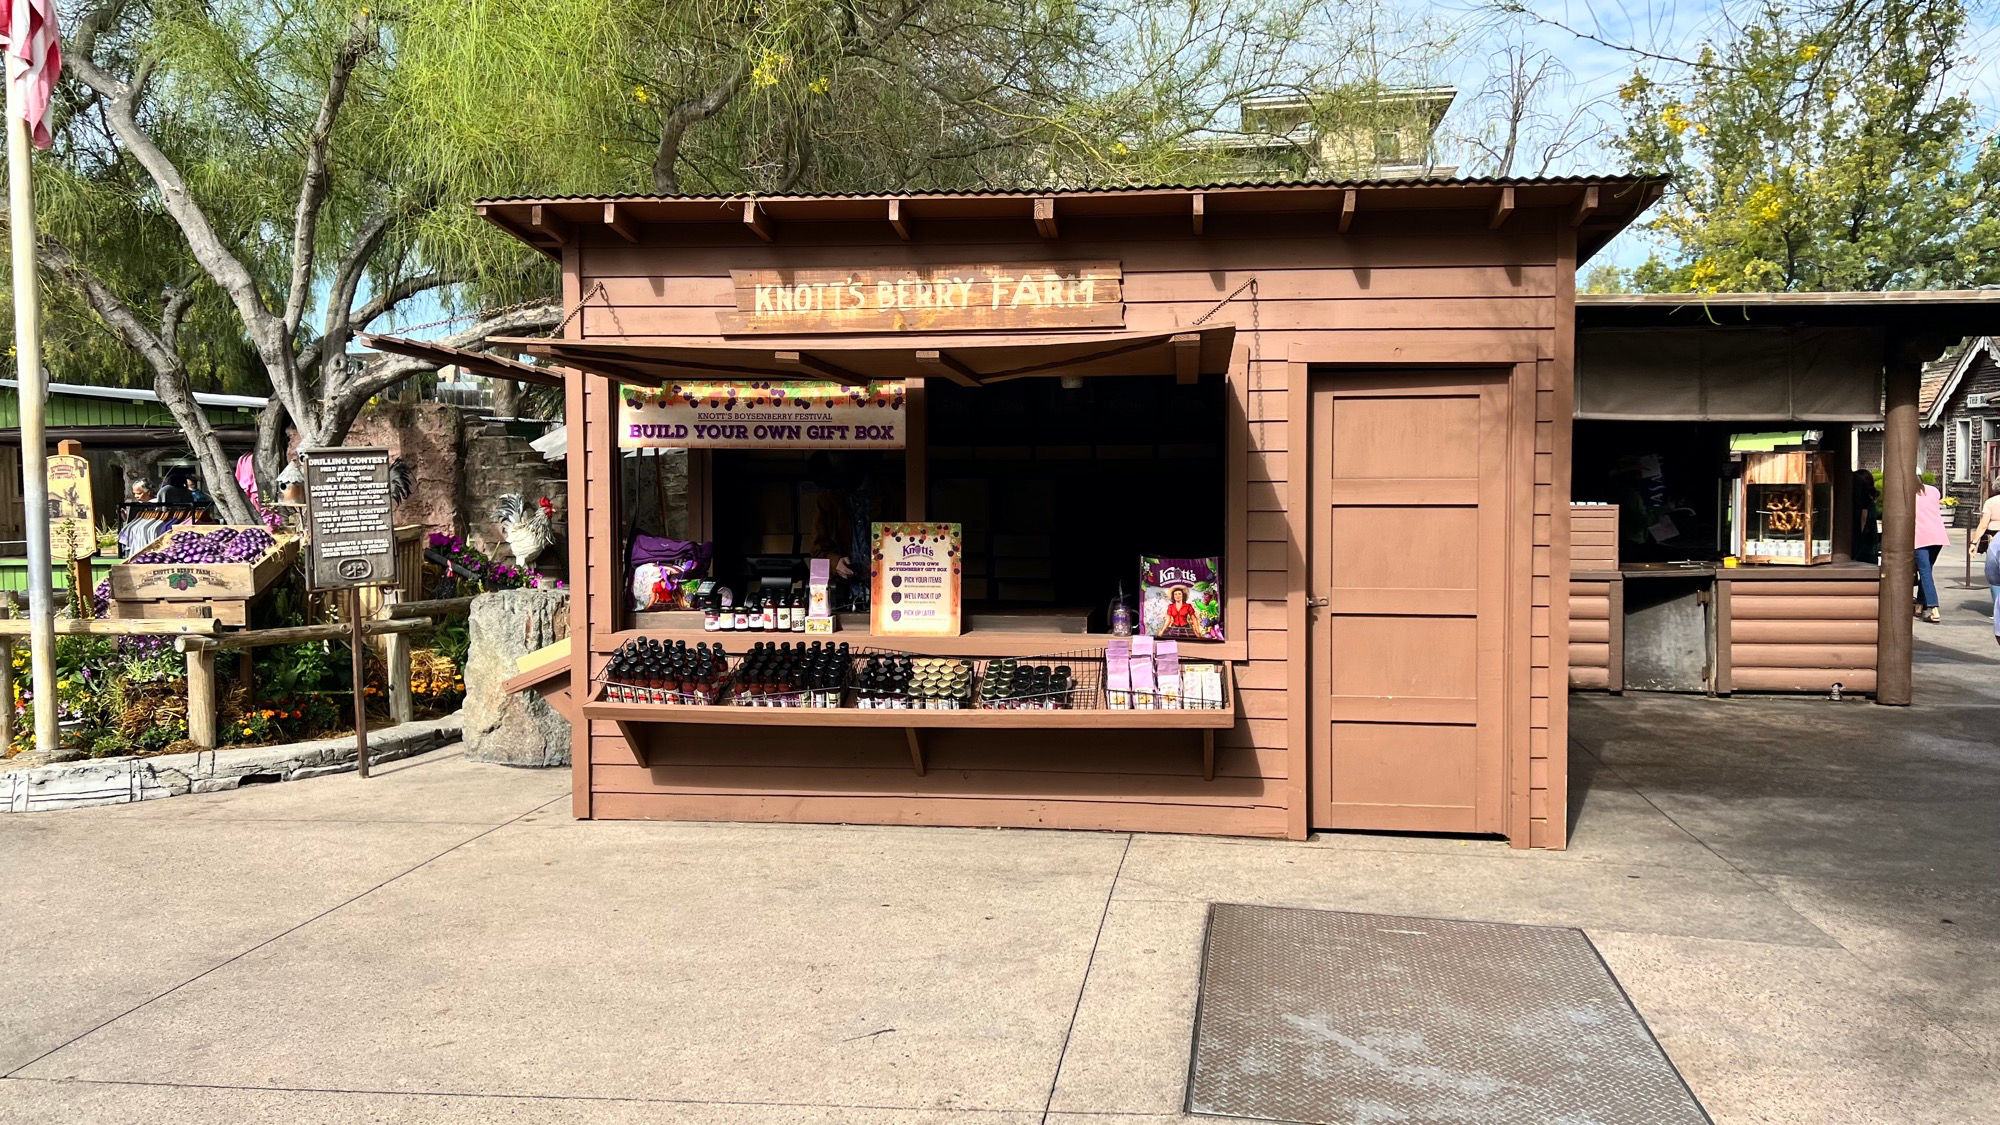 Knott's Berry Farm Build Your Own Gift Box